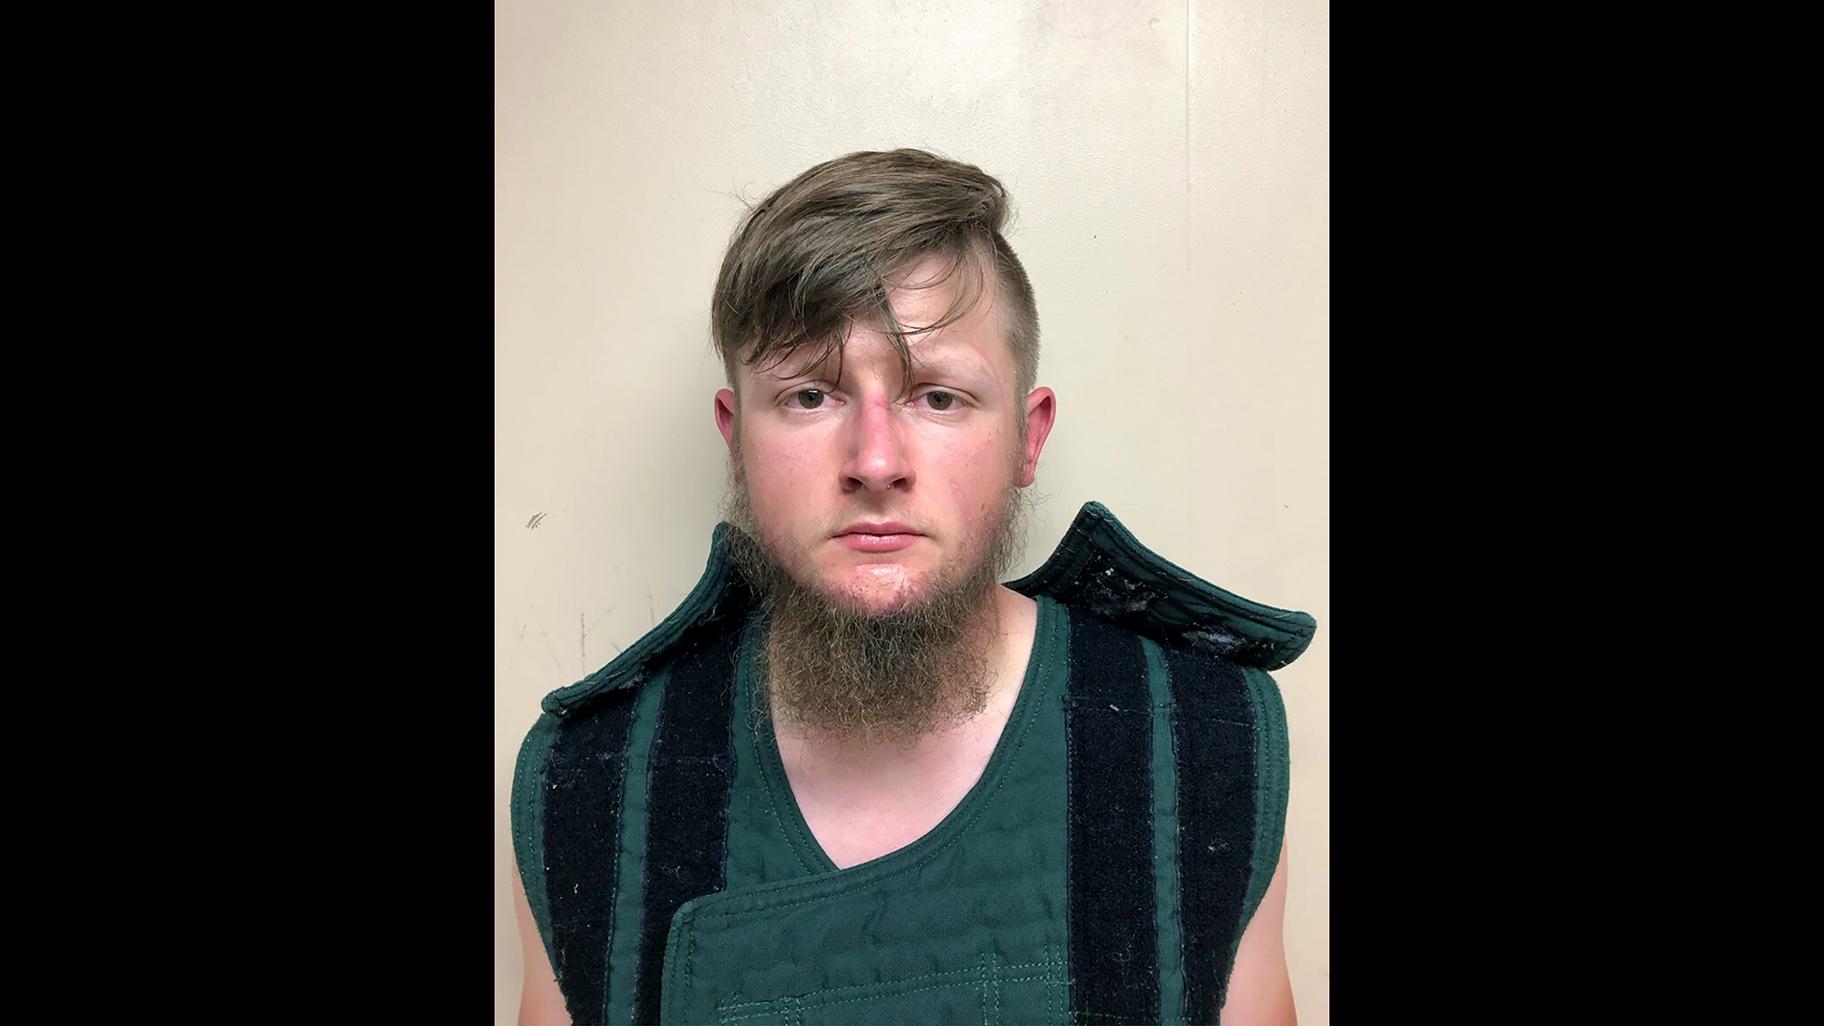 This booking photo provided by the Crisp County Sheriff’s Office shows Robert Aaron Long on Tuesday, March 16, 2021. (Crisp County Sheriff’s Office via AP)